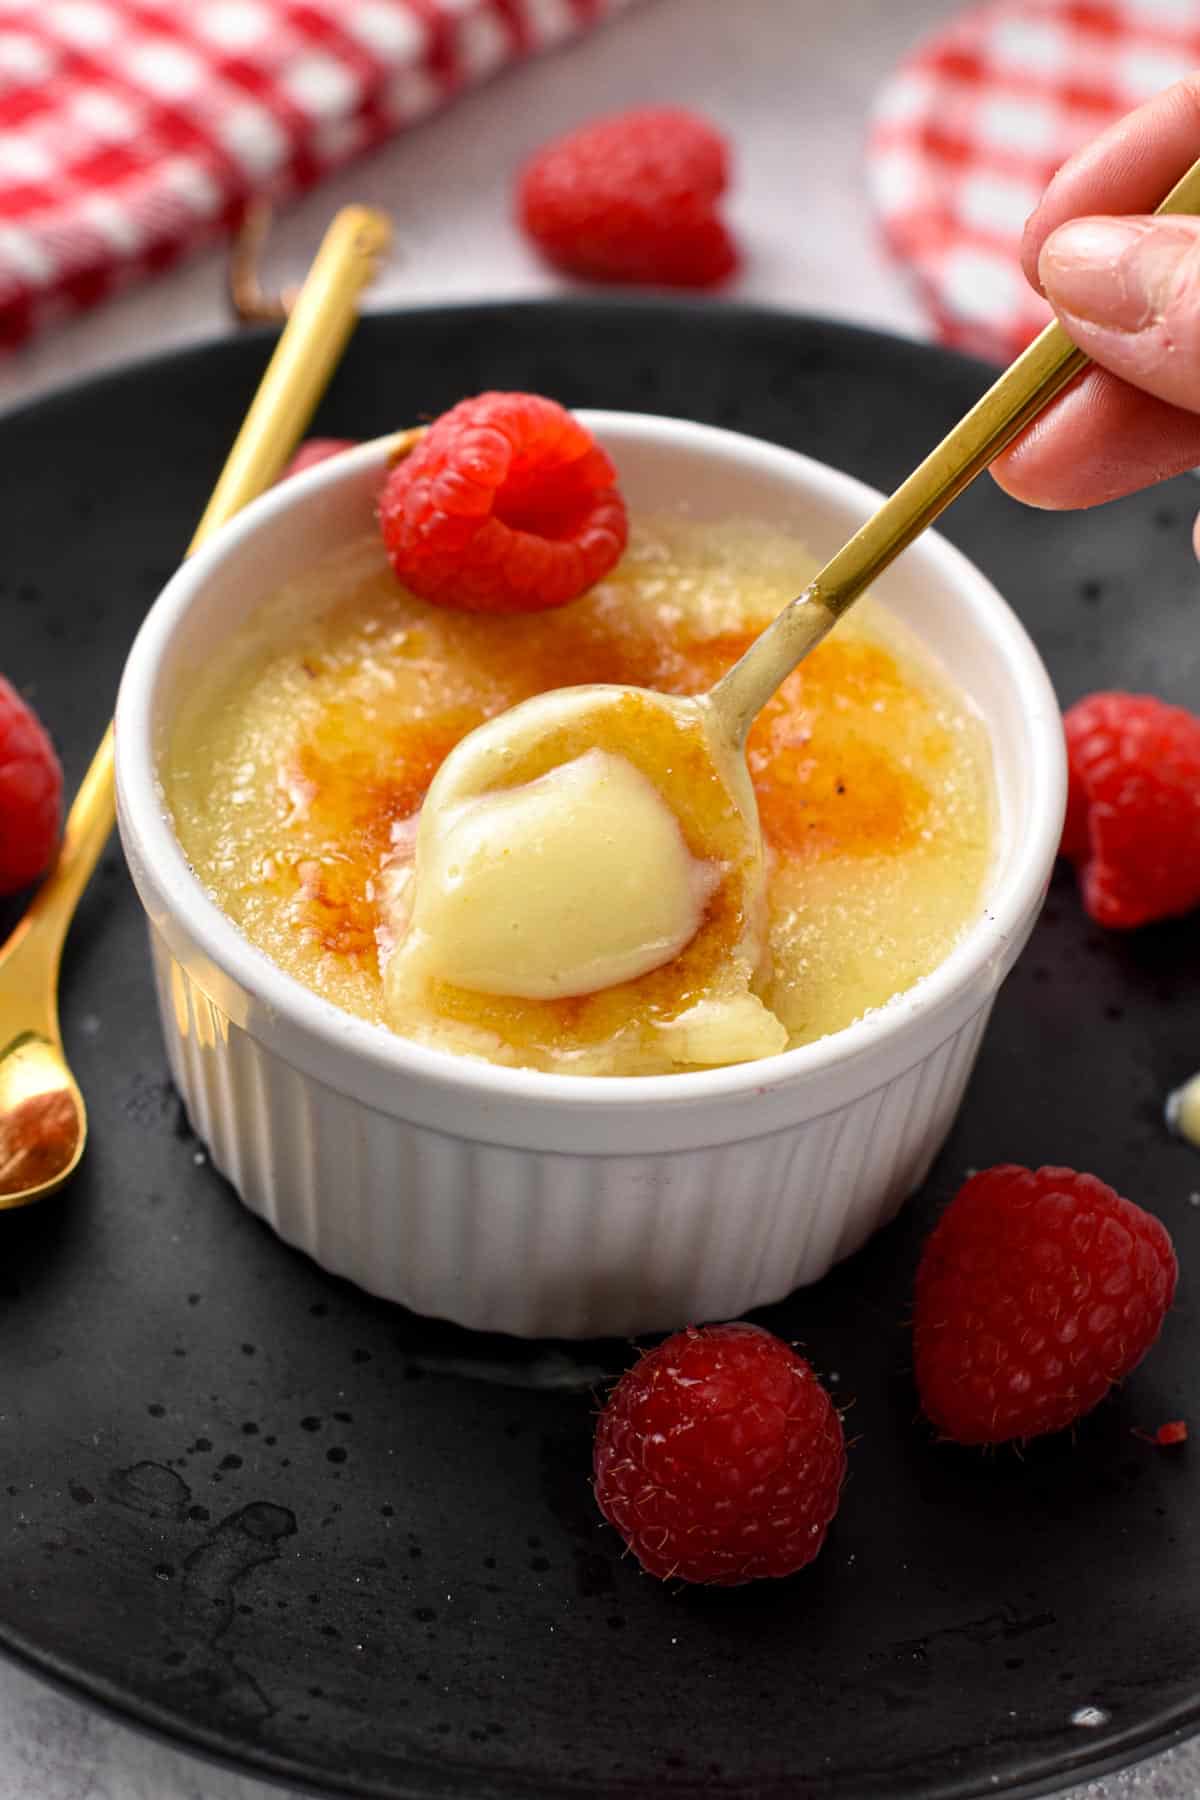 A golden spoon digging in a creamy creme brulee with crispy caramel topping and a raspberry on side.